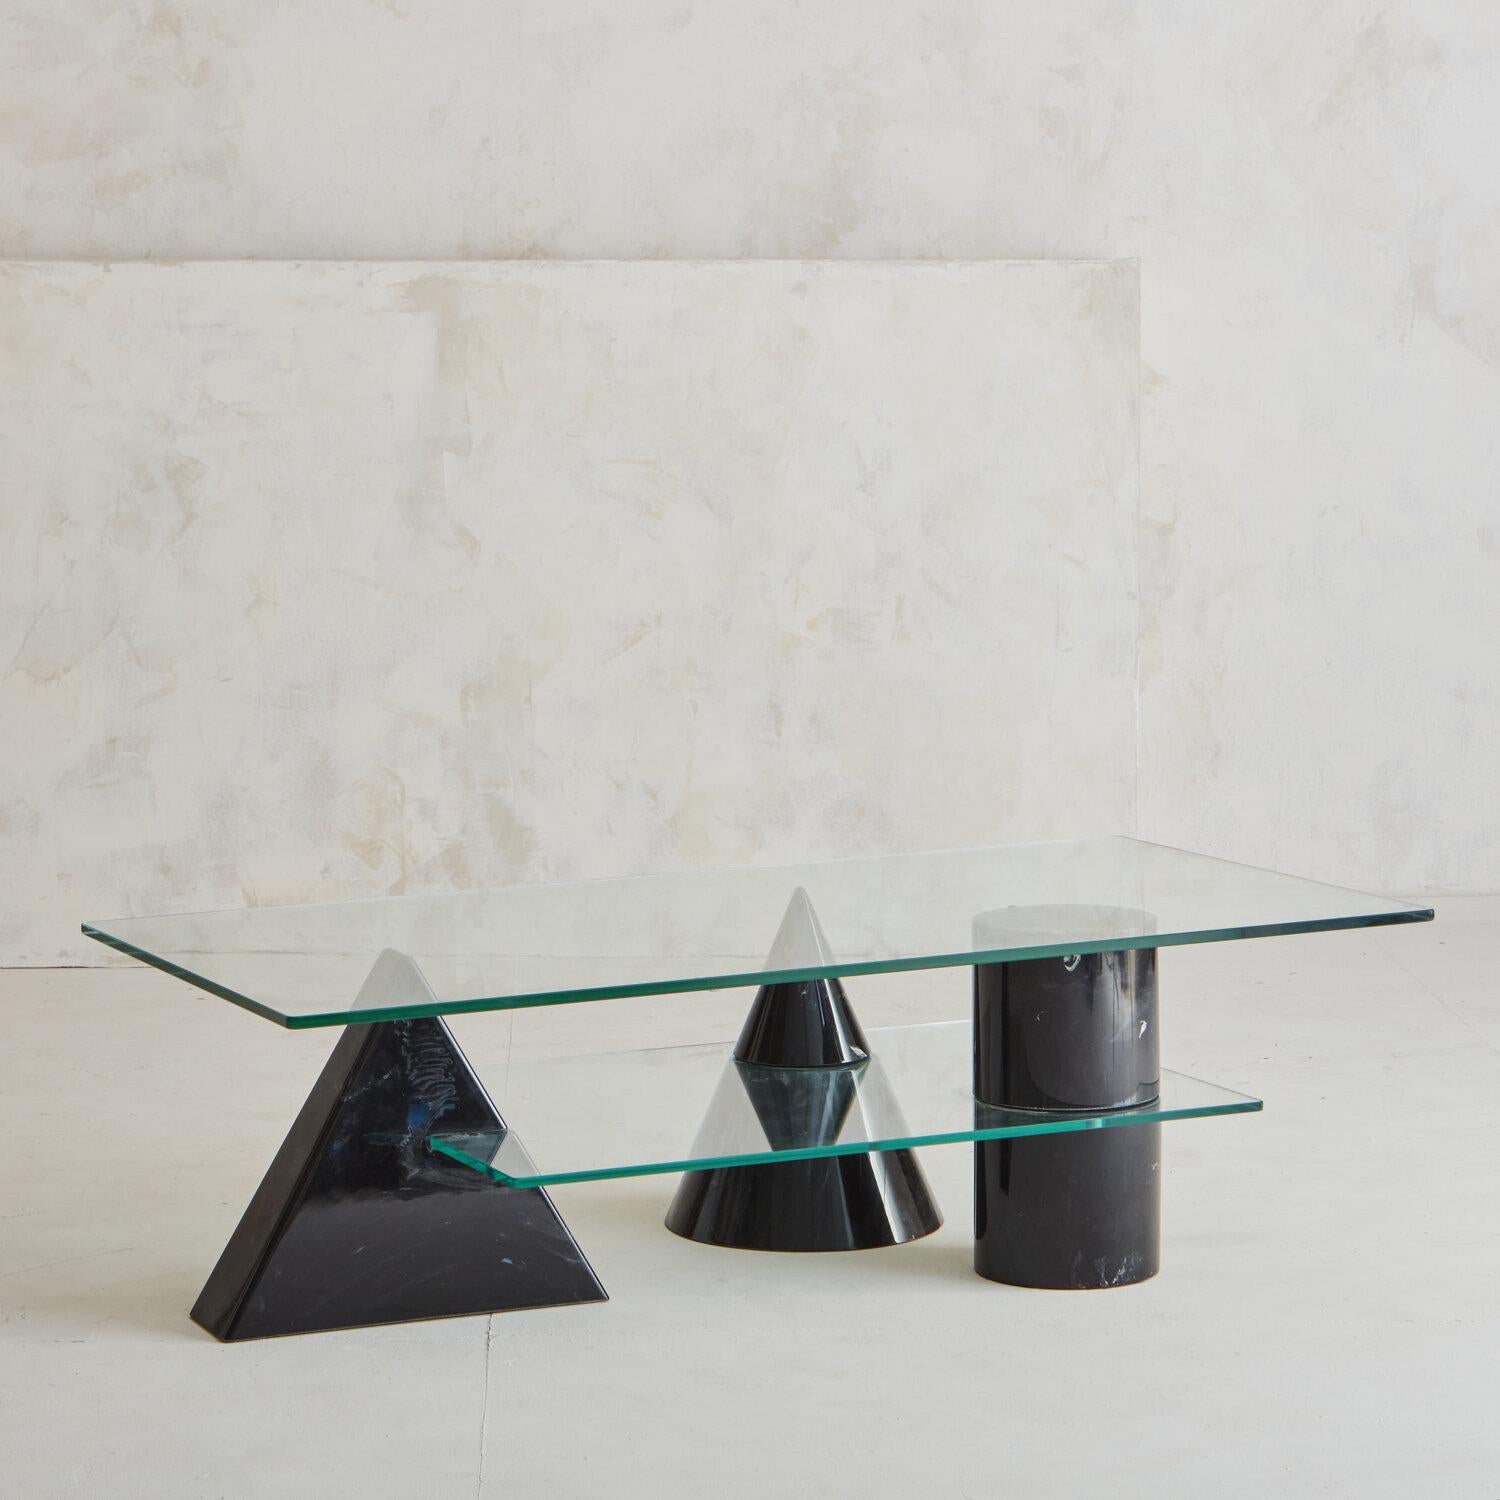 A vintage Italian coffee table featuring 3 Nero Marquina solid marble shapes: a Cylinder, Cone and Pyramid. The three marble shapes support a glass top and a secondary glass shelf. We appreciate the uniqueness of this second glass shelf, which is